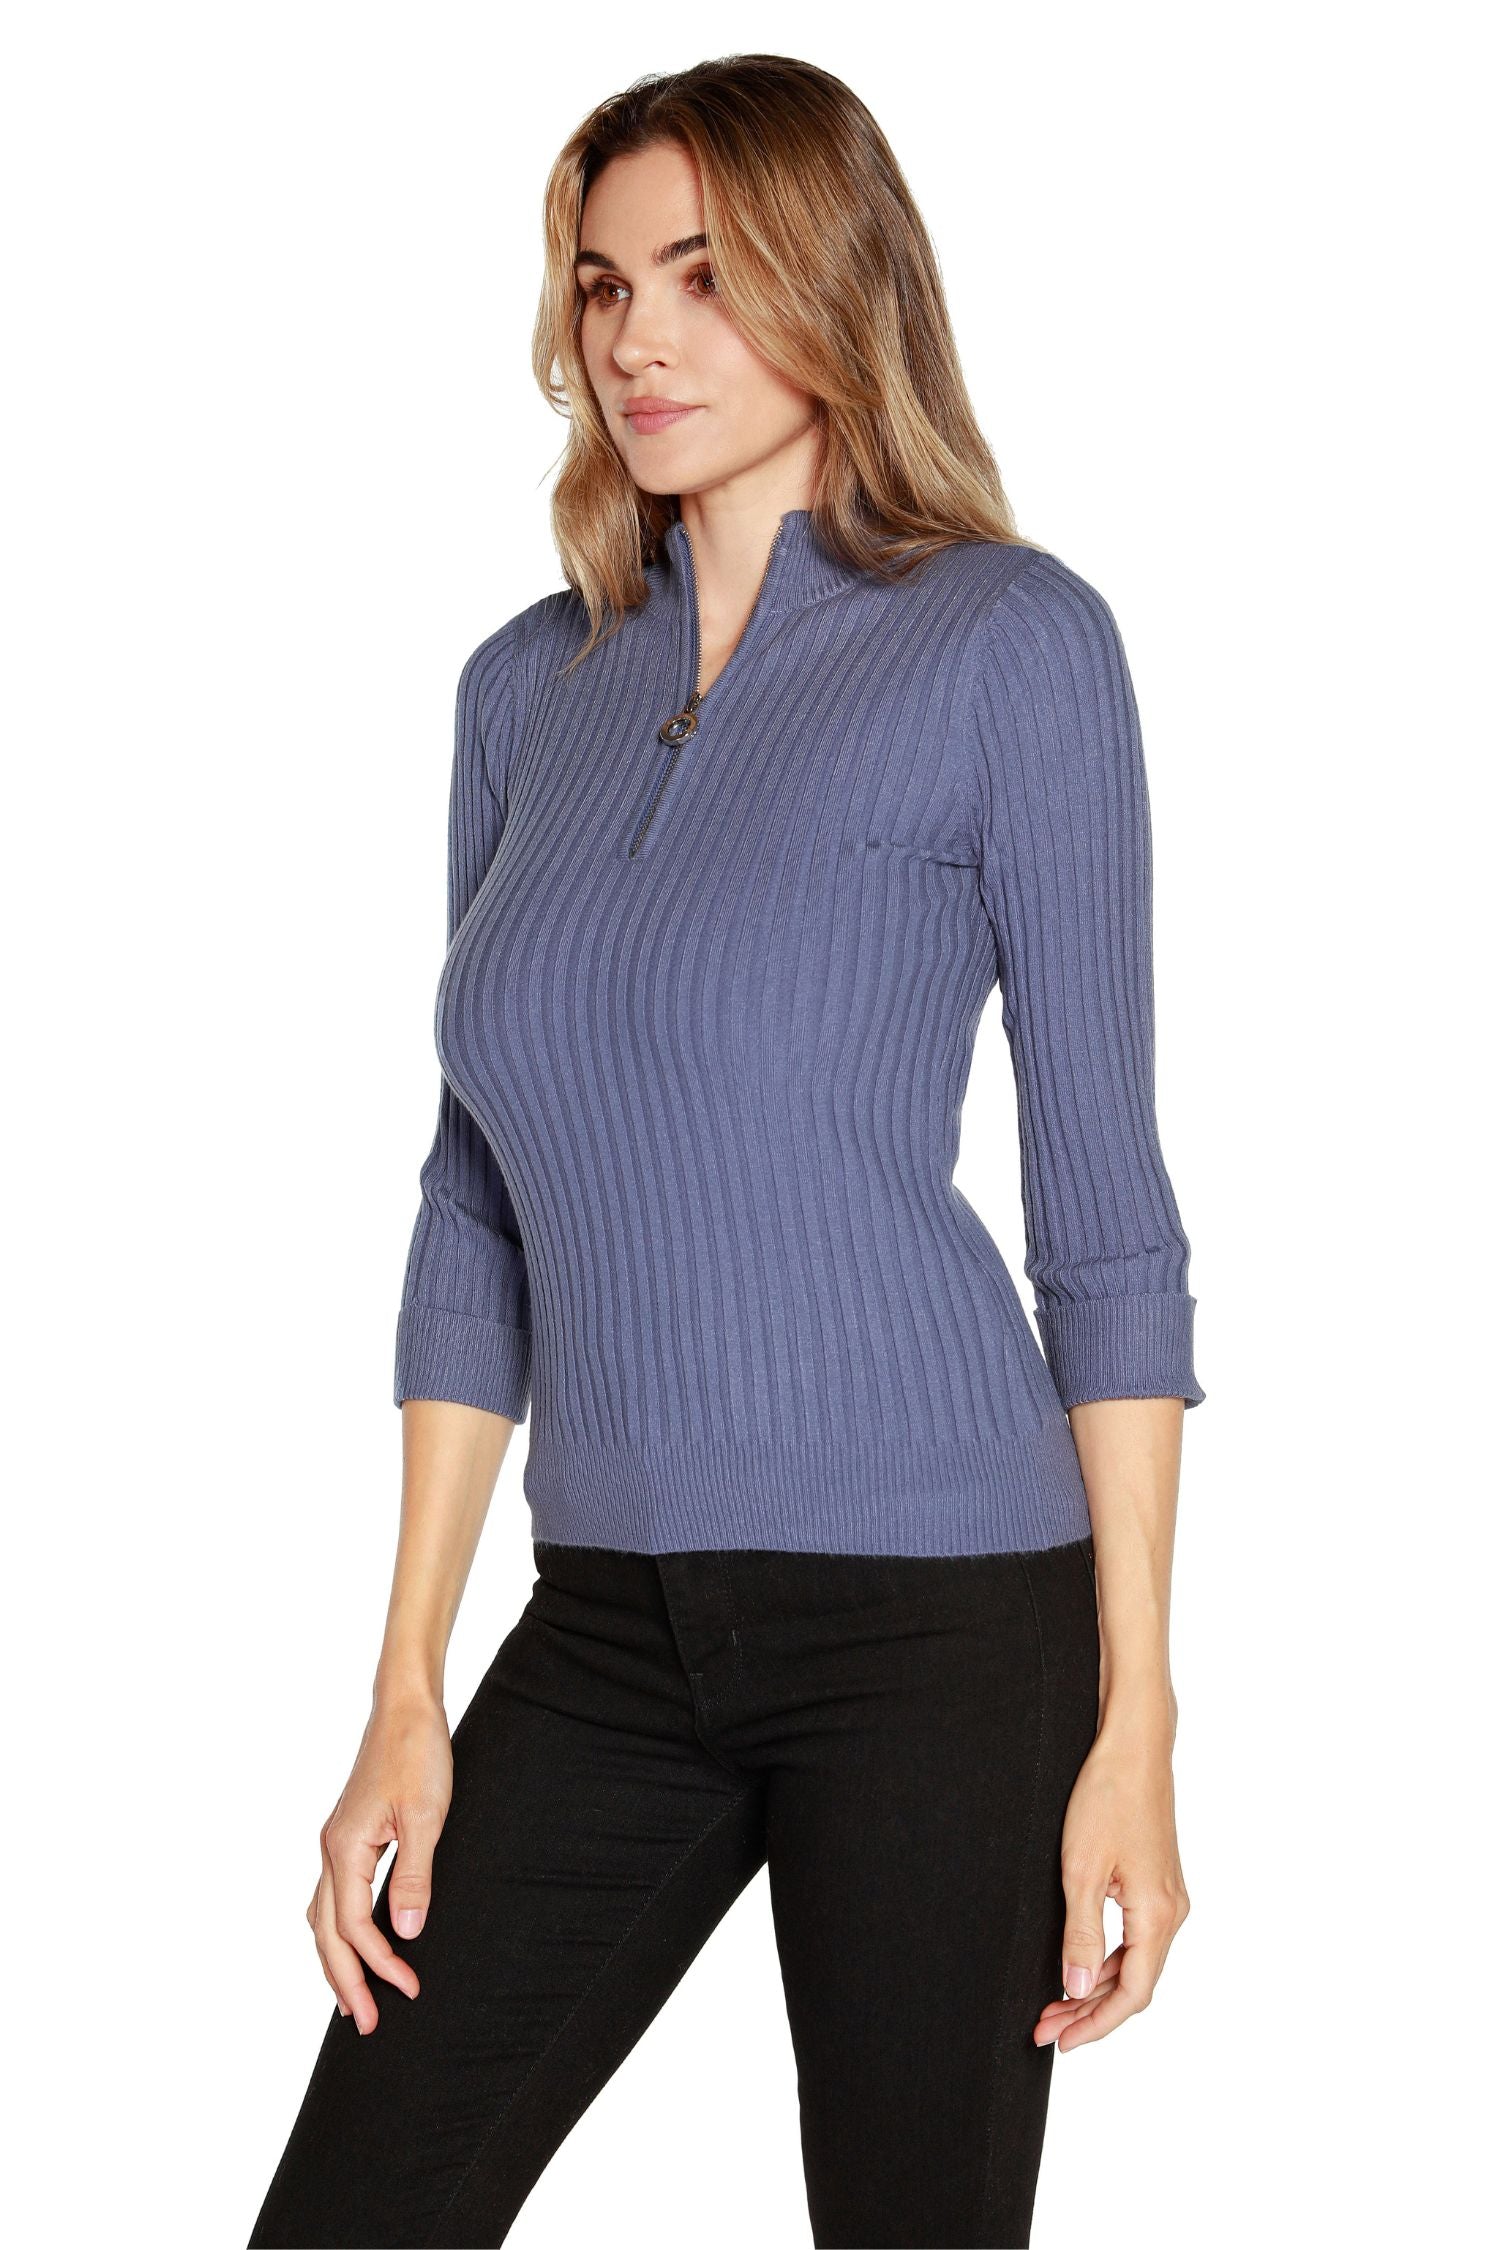 Women's Quarter Length Zipper Polo with 3/4 Sleeves and Mock Neck Collar